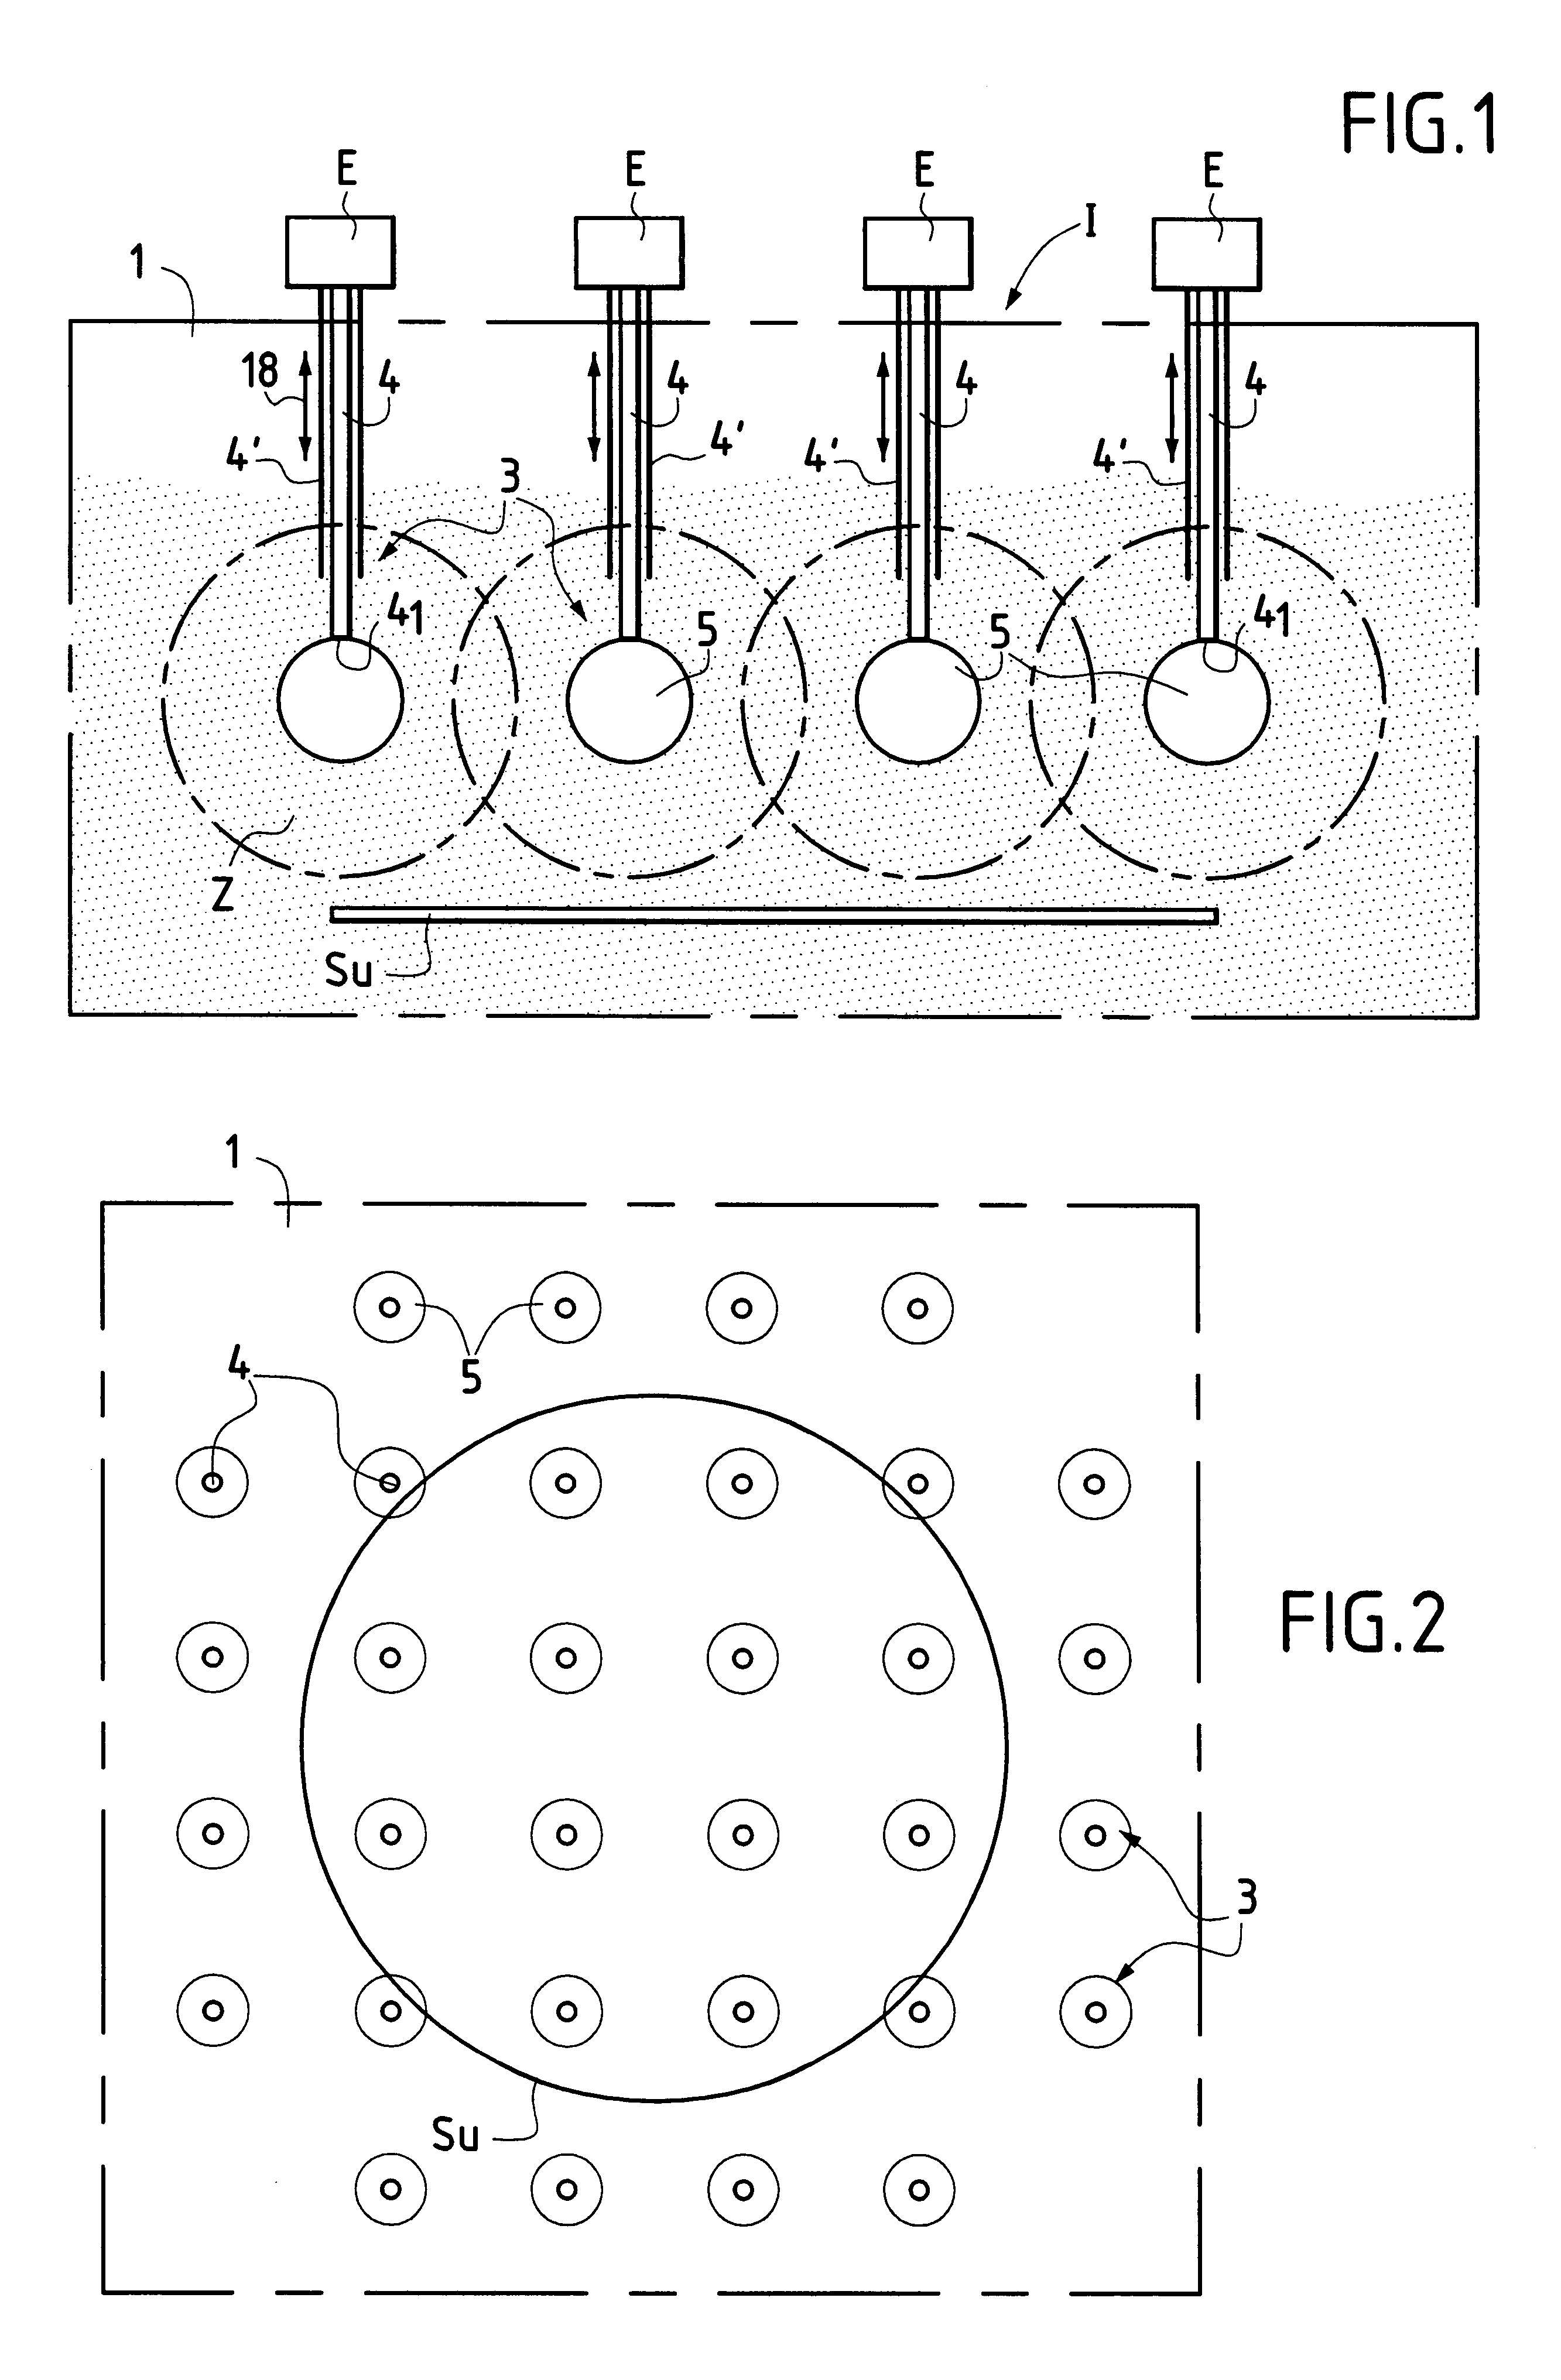 Method of producing individual plasmas in order to create a uniform plasma for a work surface, and apparatus for producing such a plasma